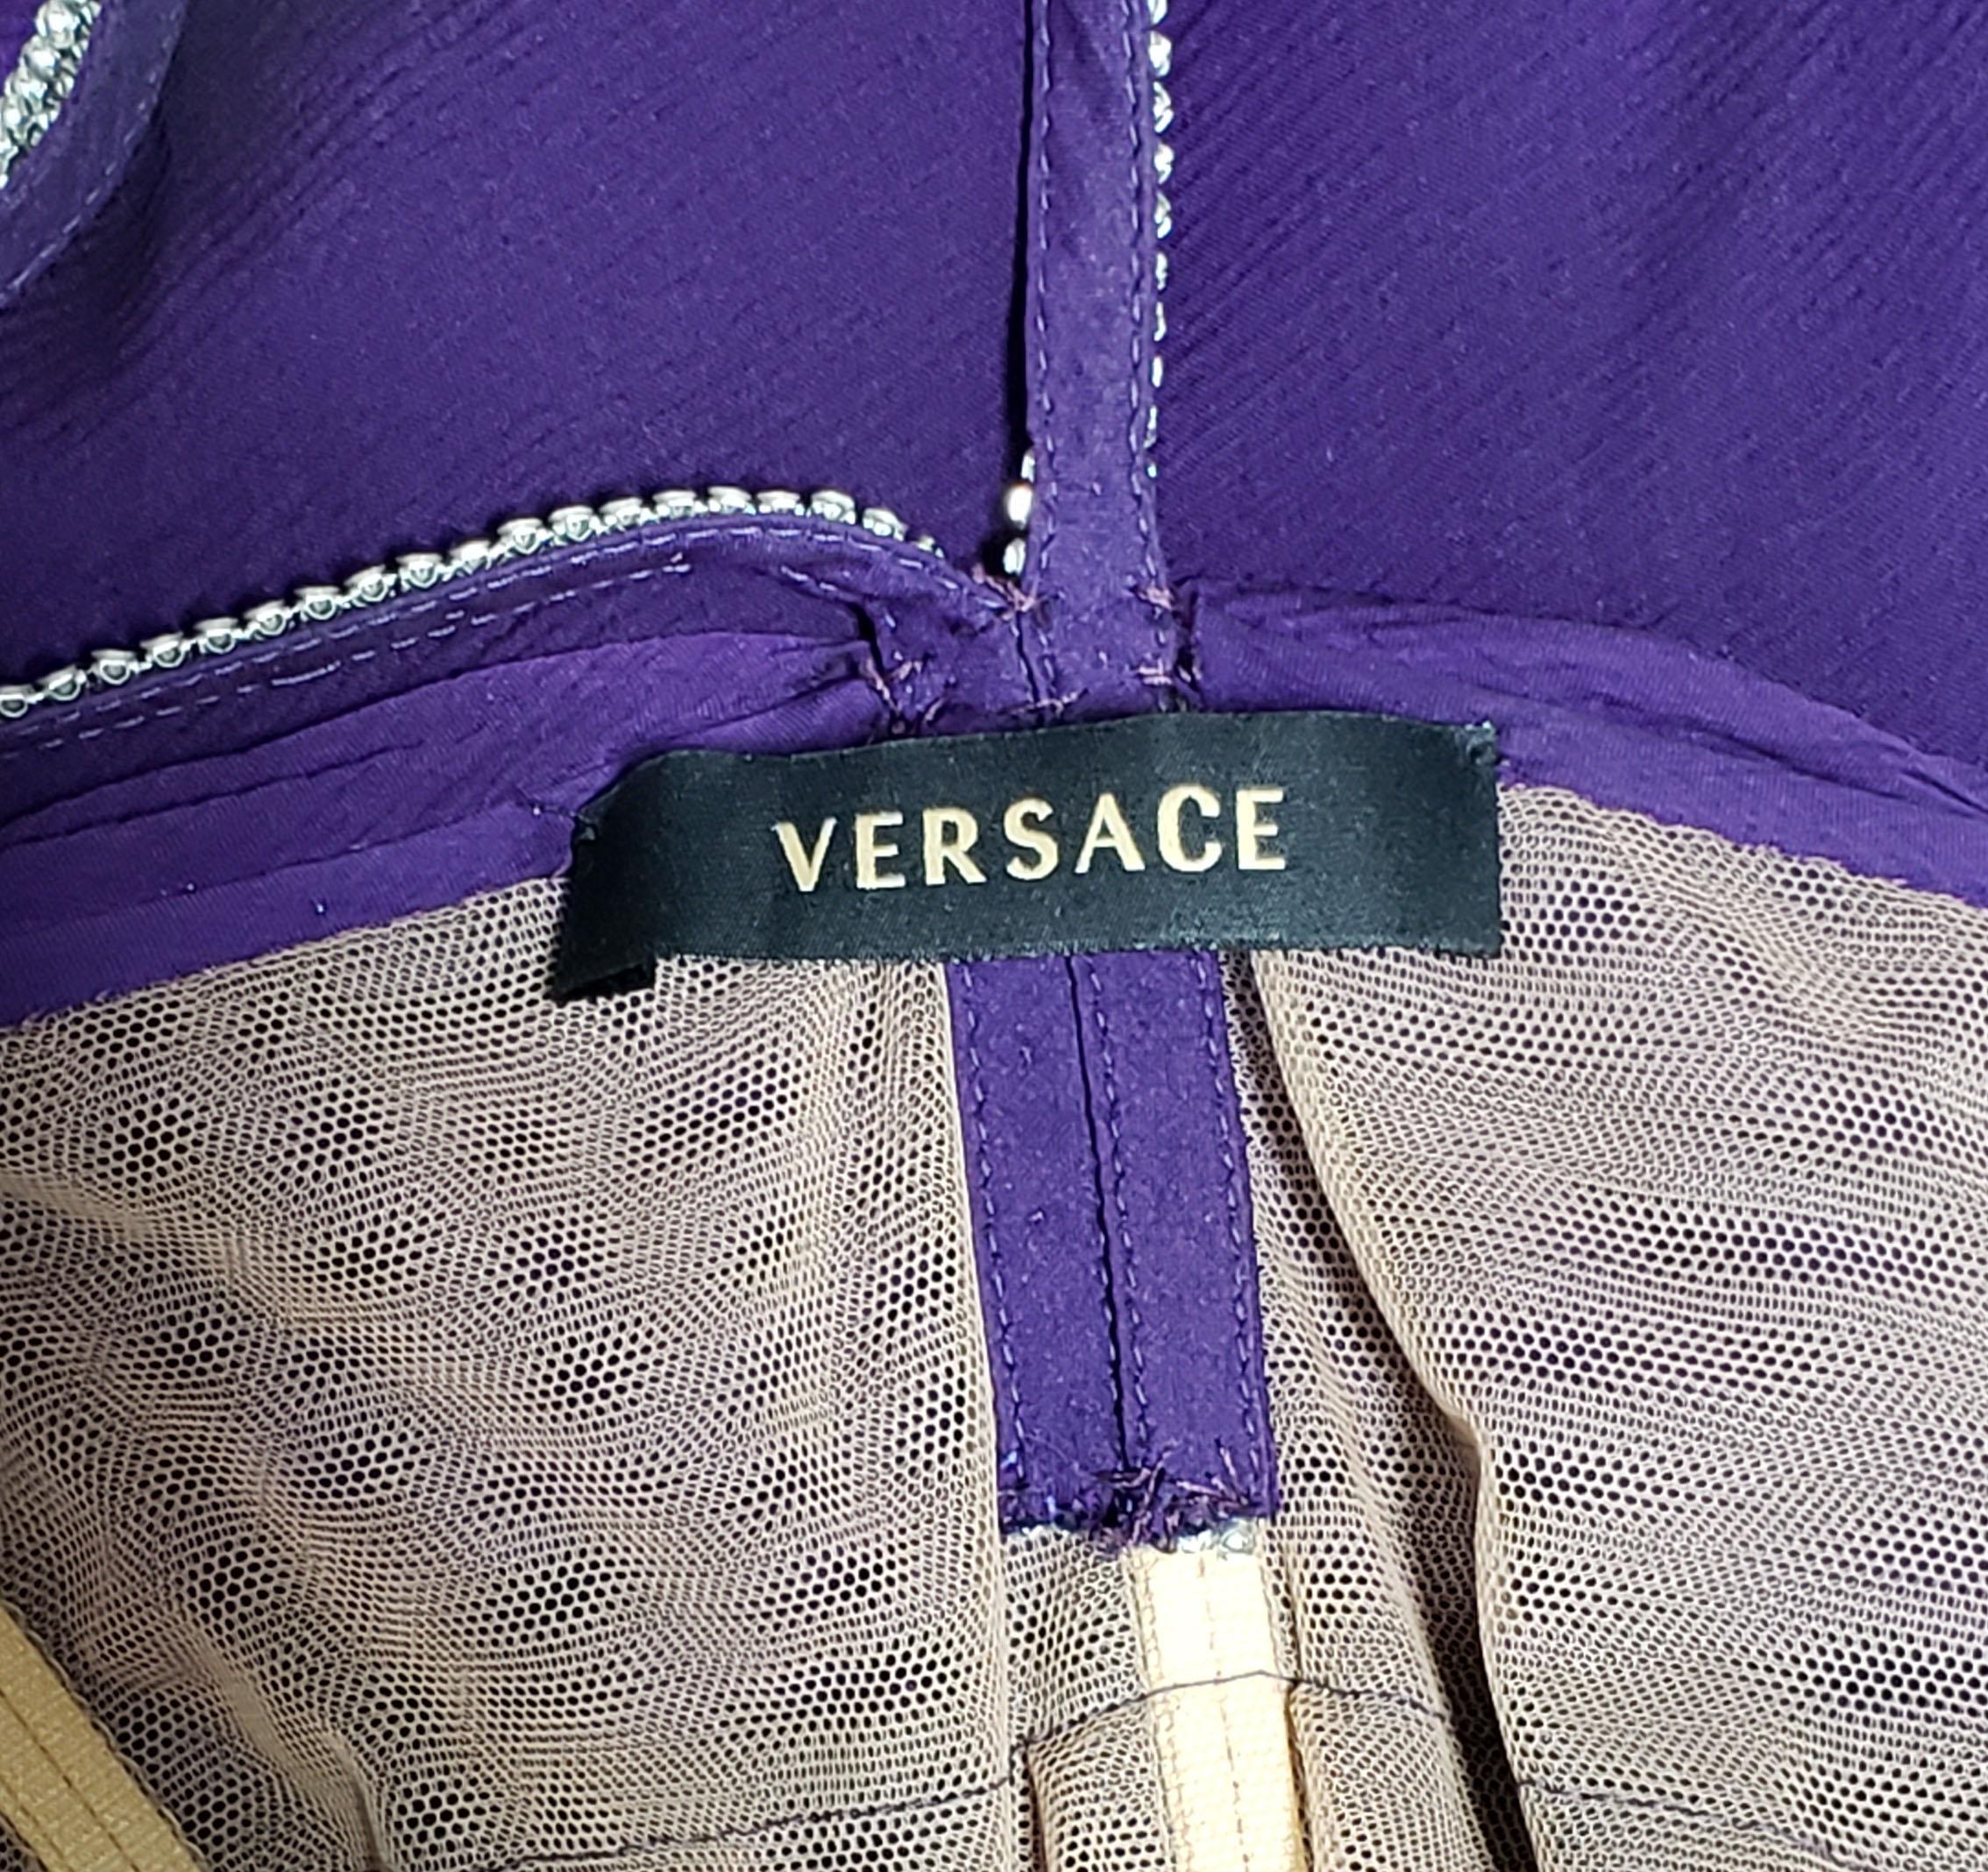 VINTAGE VERSACE CRYSTAL EMBELLISHED AMETHYST SILK DRESS with CHAIN MAIL STRAPS 5